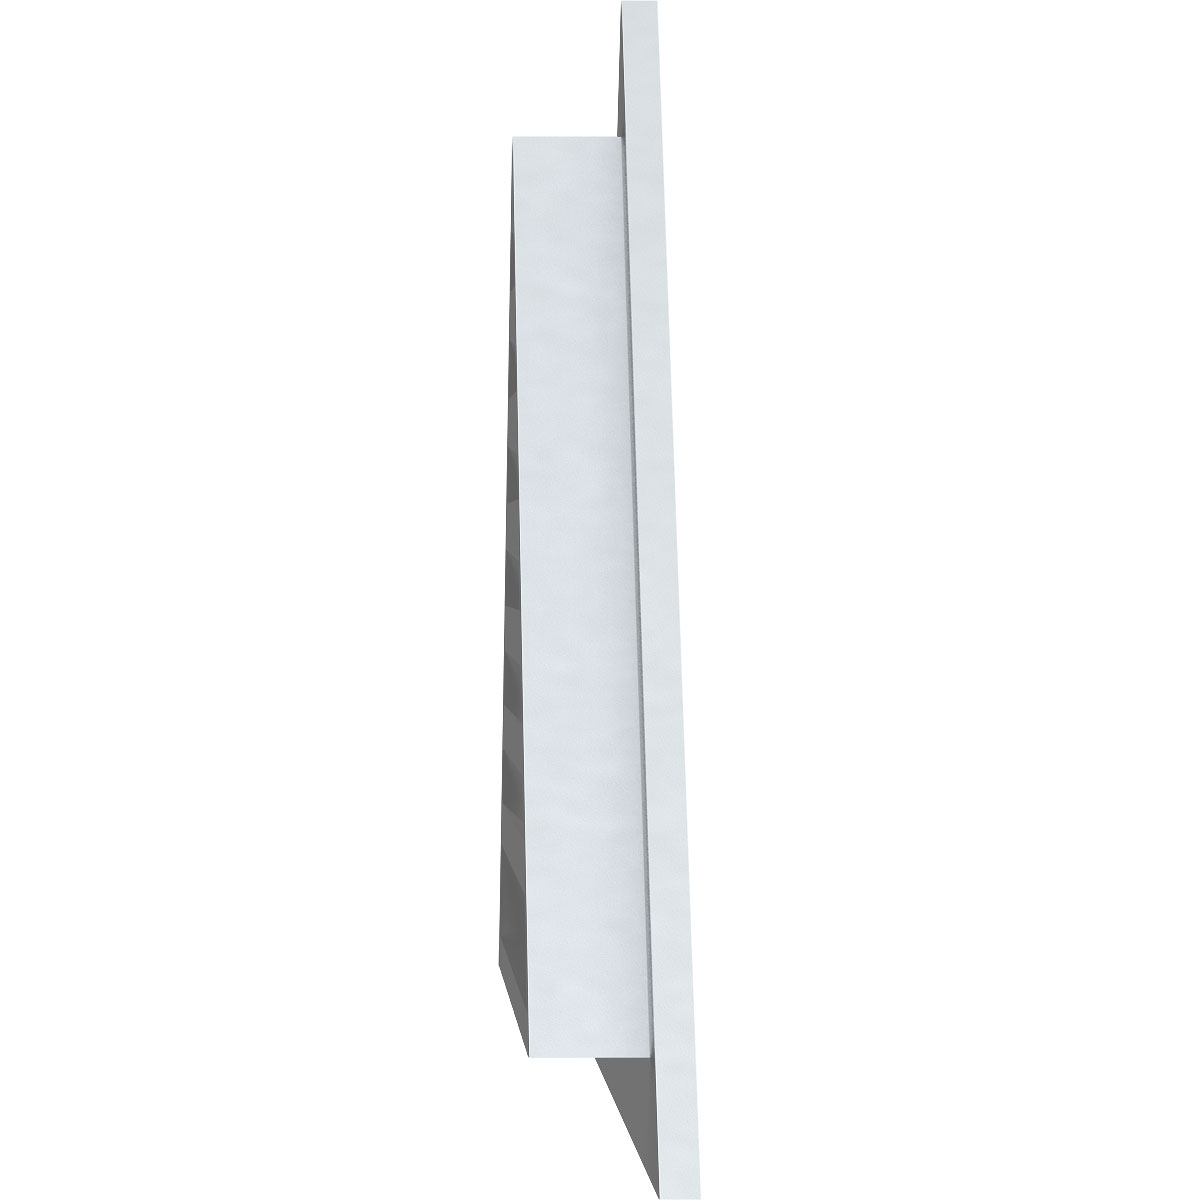 Ekena Millwork 36"W x 15"H Triangle Gable Vent (49 3/4"W x 20 3/4"H Frame Size) 10/12 Pitch Functional, PVC Gable Vent with 1" x 4" Flat Trim Frame - image 3 of 14